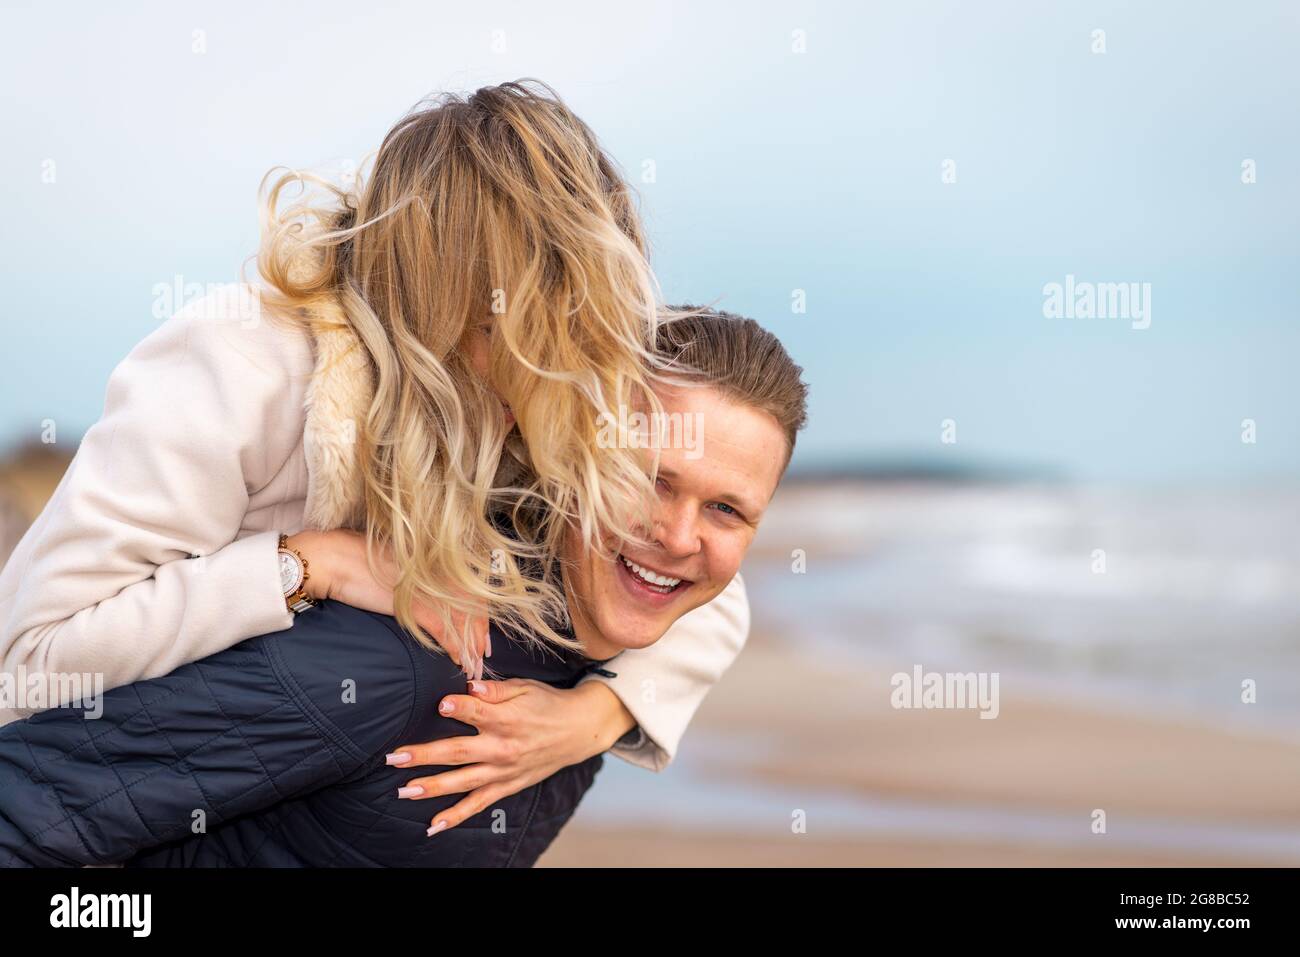 Man giving and adult woman a piggyback ride laughing and having fun in San  Diego, California. Stock Photo